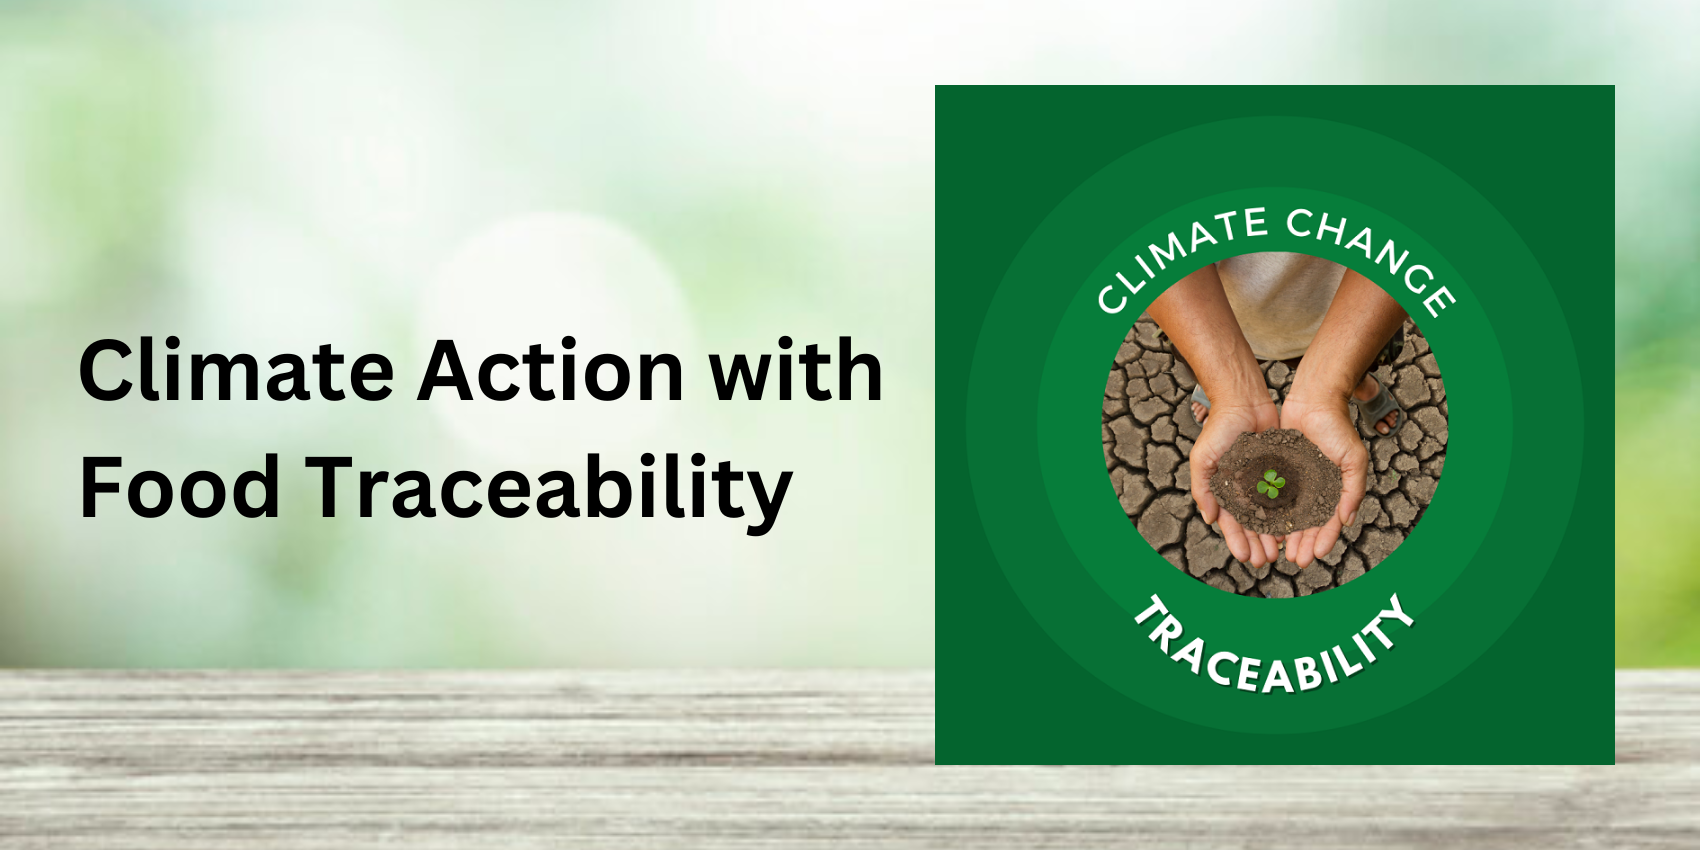 climate action for food traceability, carbon management, carbon accounting, food traceability, food supply chain